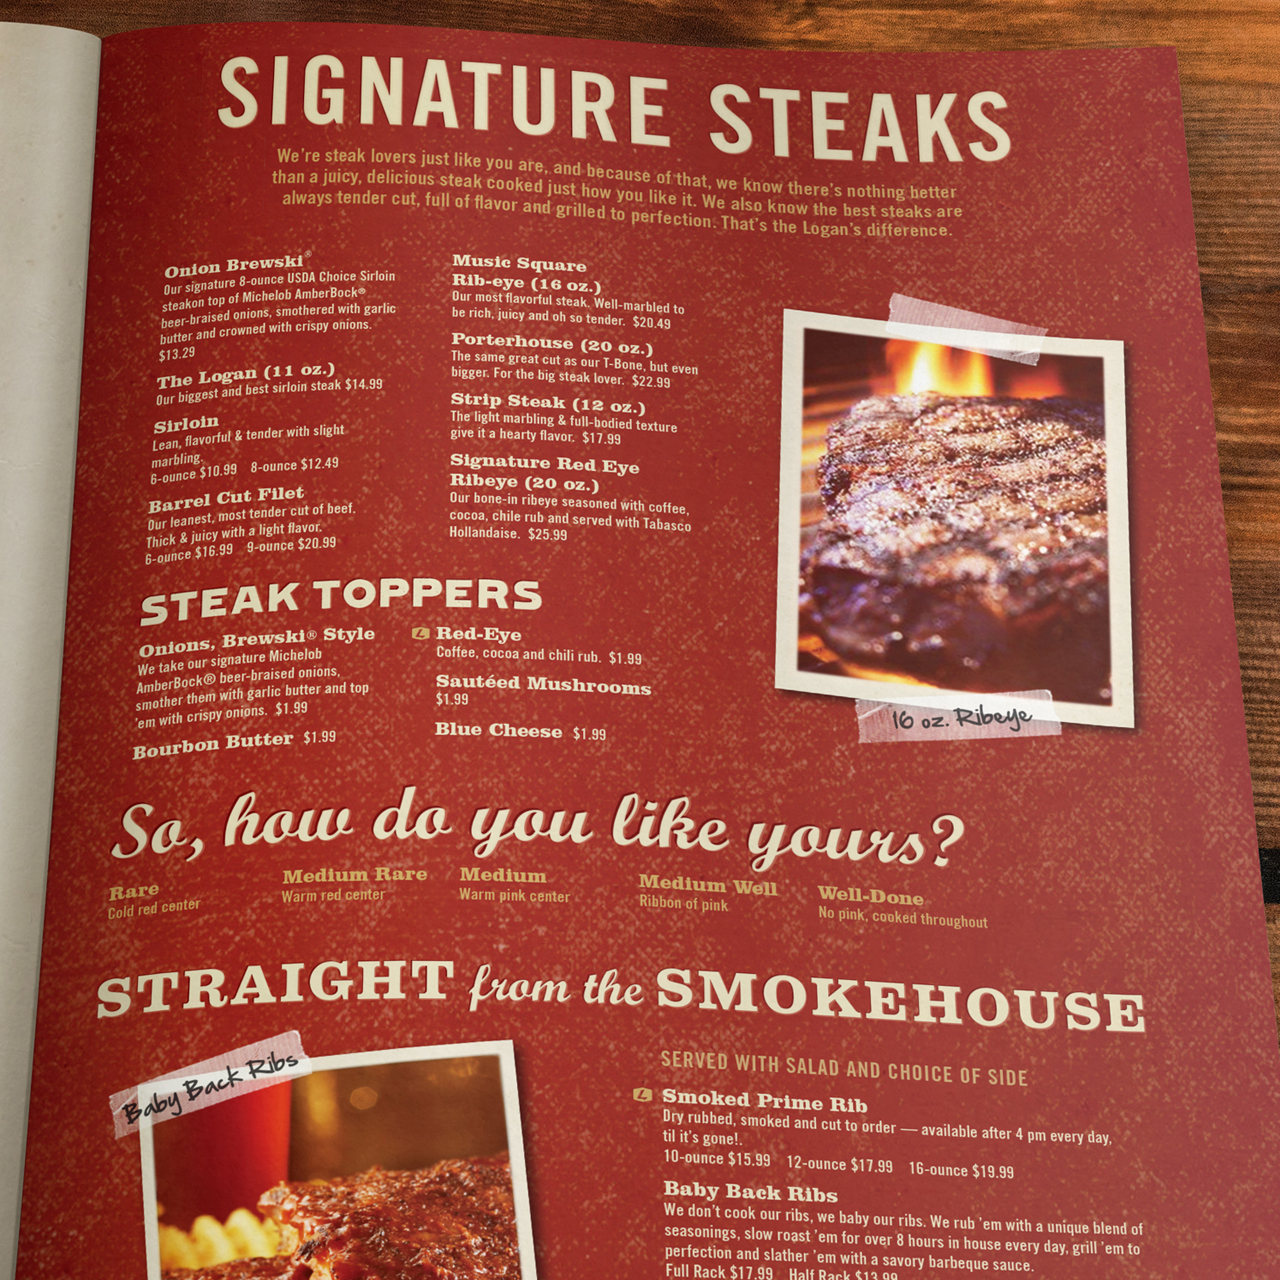 An image of the Signature Steaks page design for the Logan's Roadhouse menu